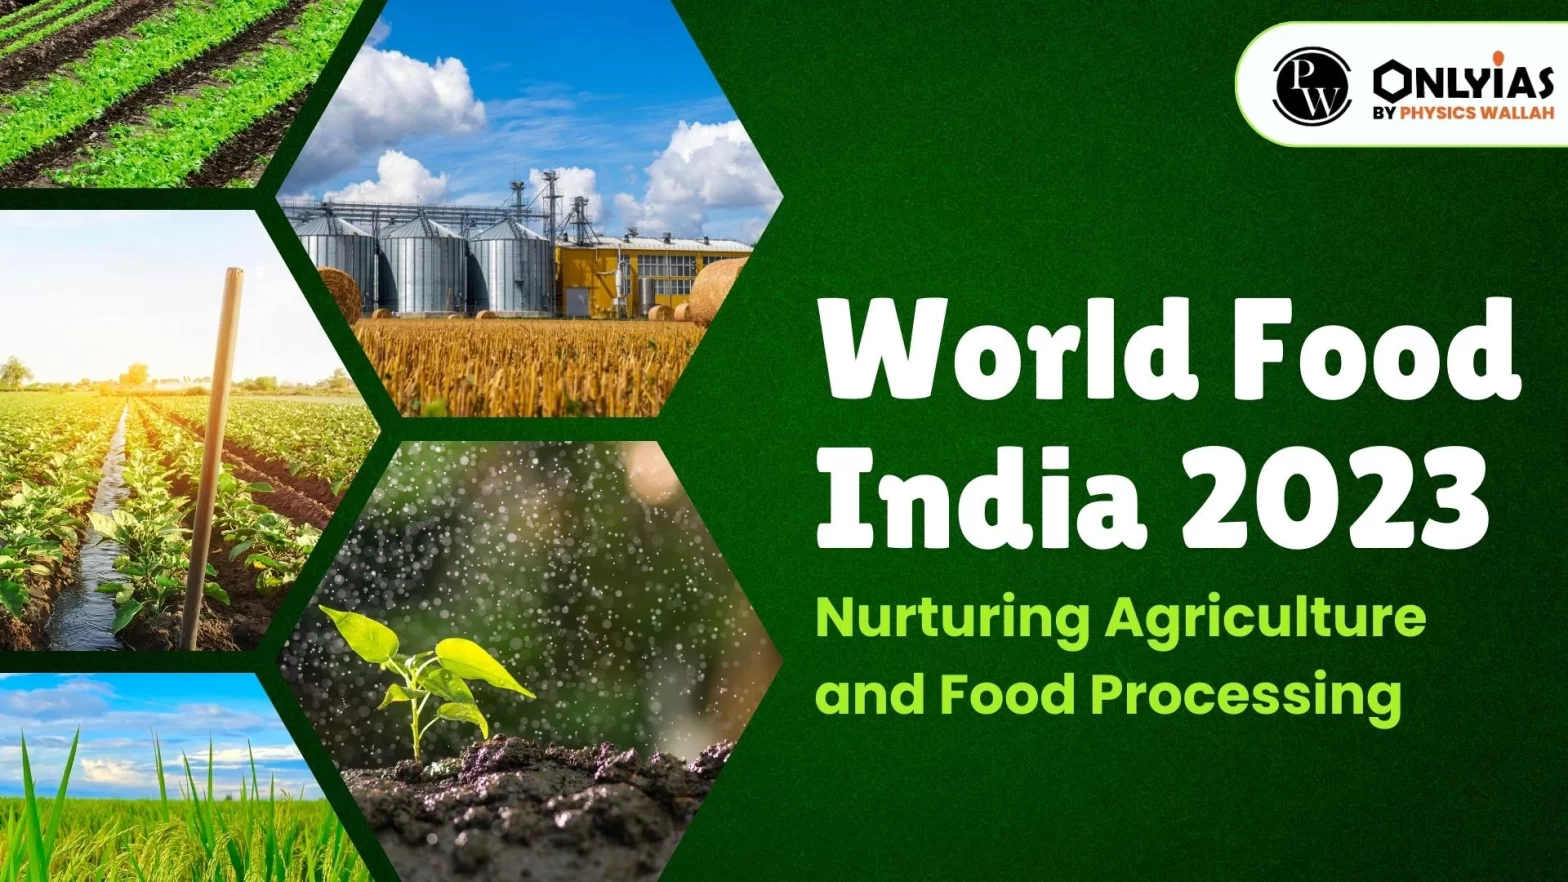 World Food India 2023: Nurturing Agriculture and Food Processing